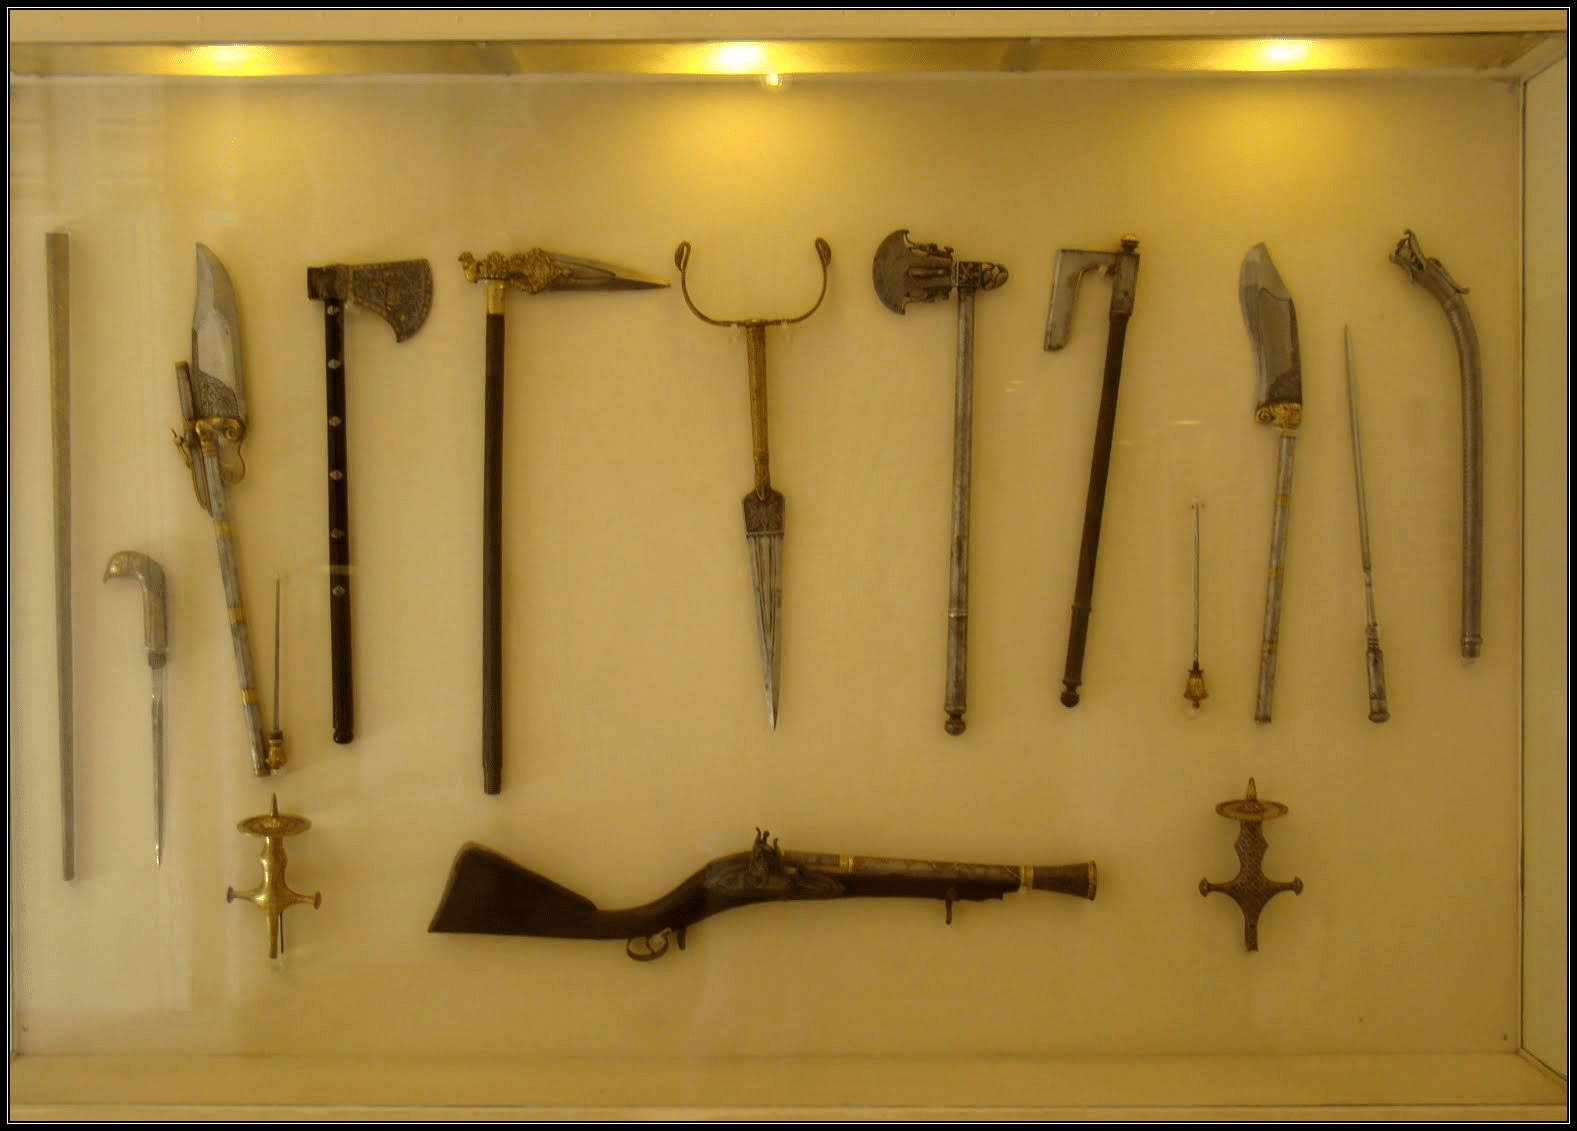 Witness the weapons of the Rajputs 